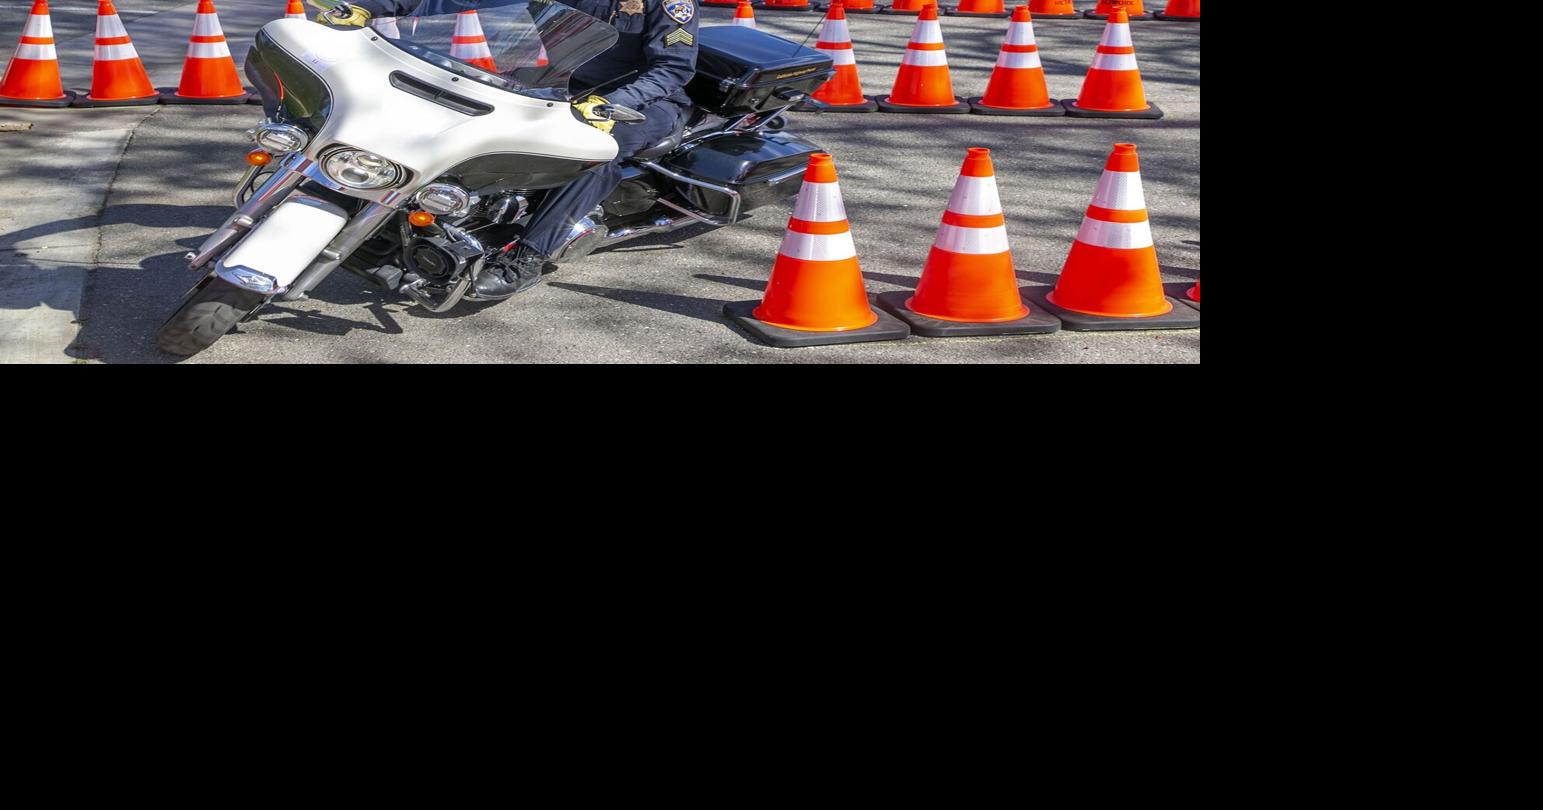 BPD motor officers, and guests, practice for motorcycle competition Saturday